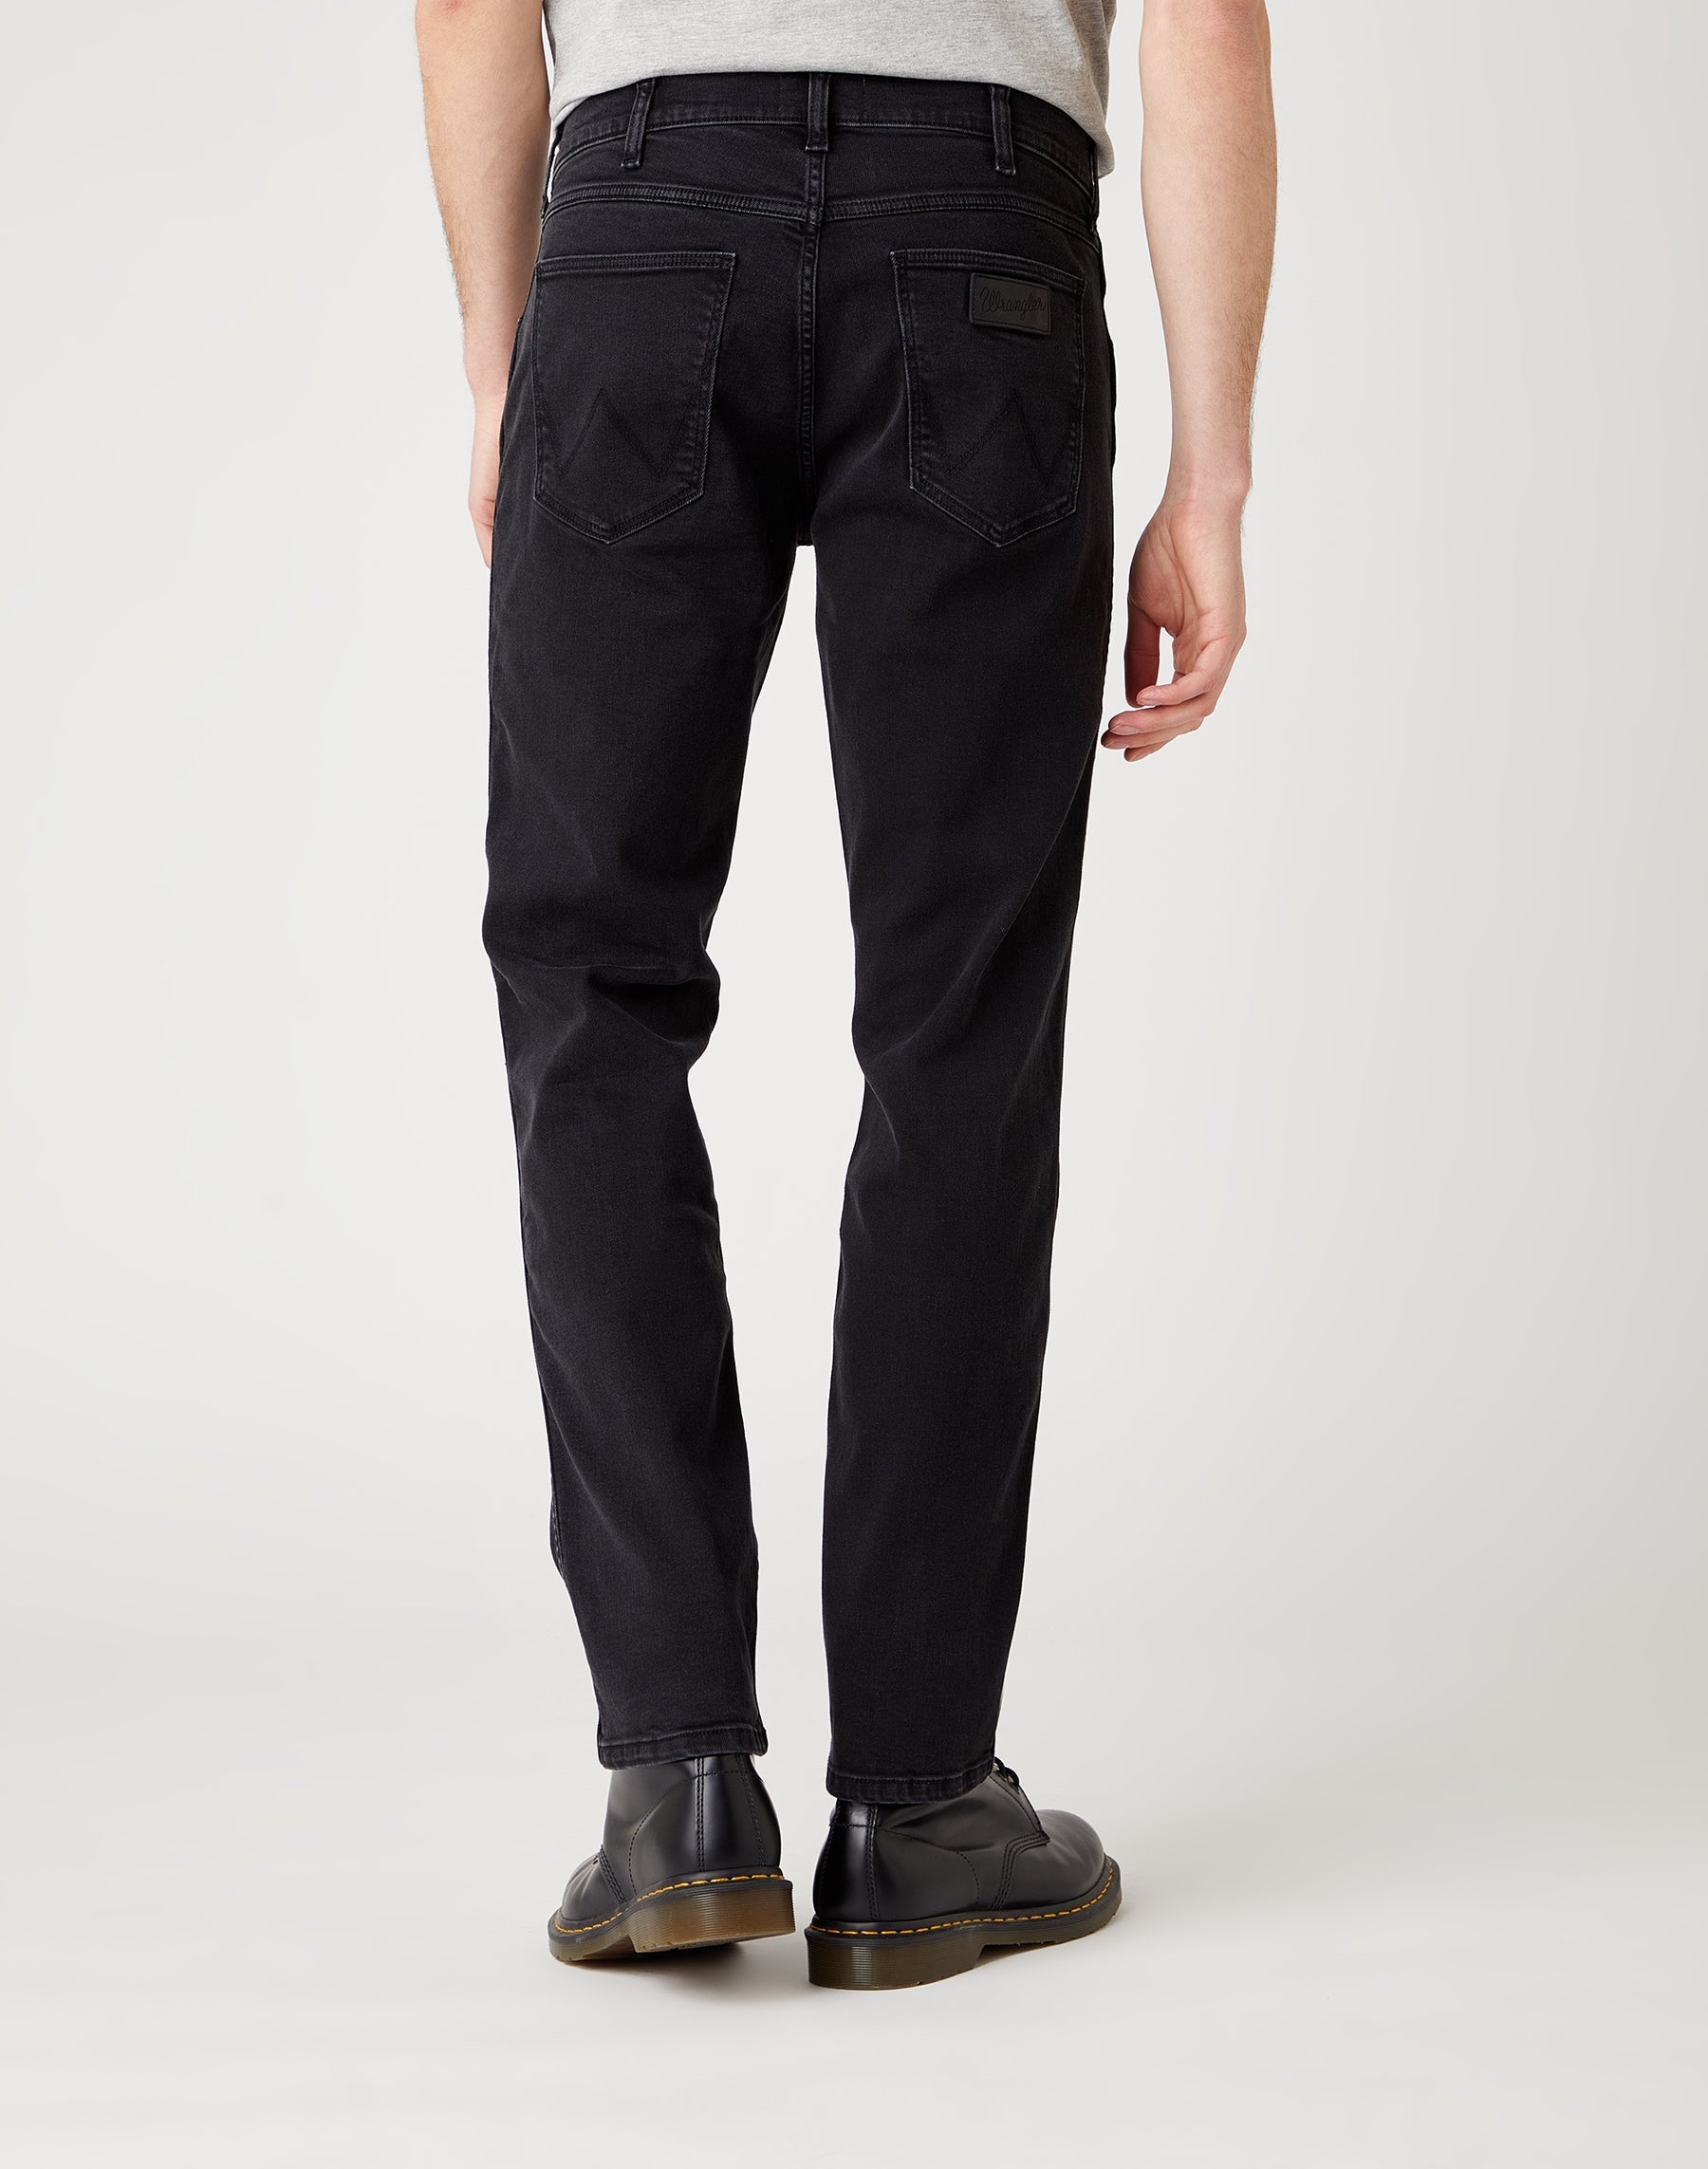 Greensboro High Stretch in Black Crow Jeans Wrangler   